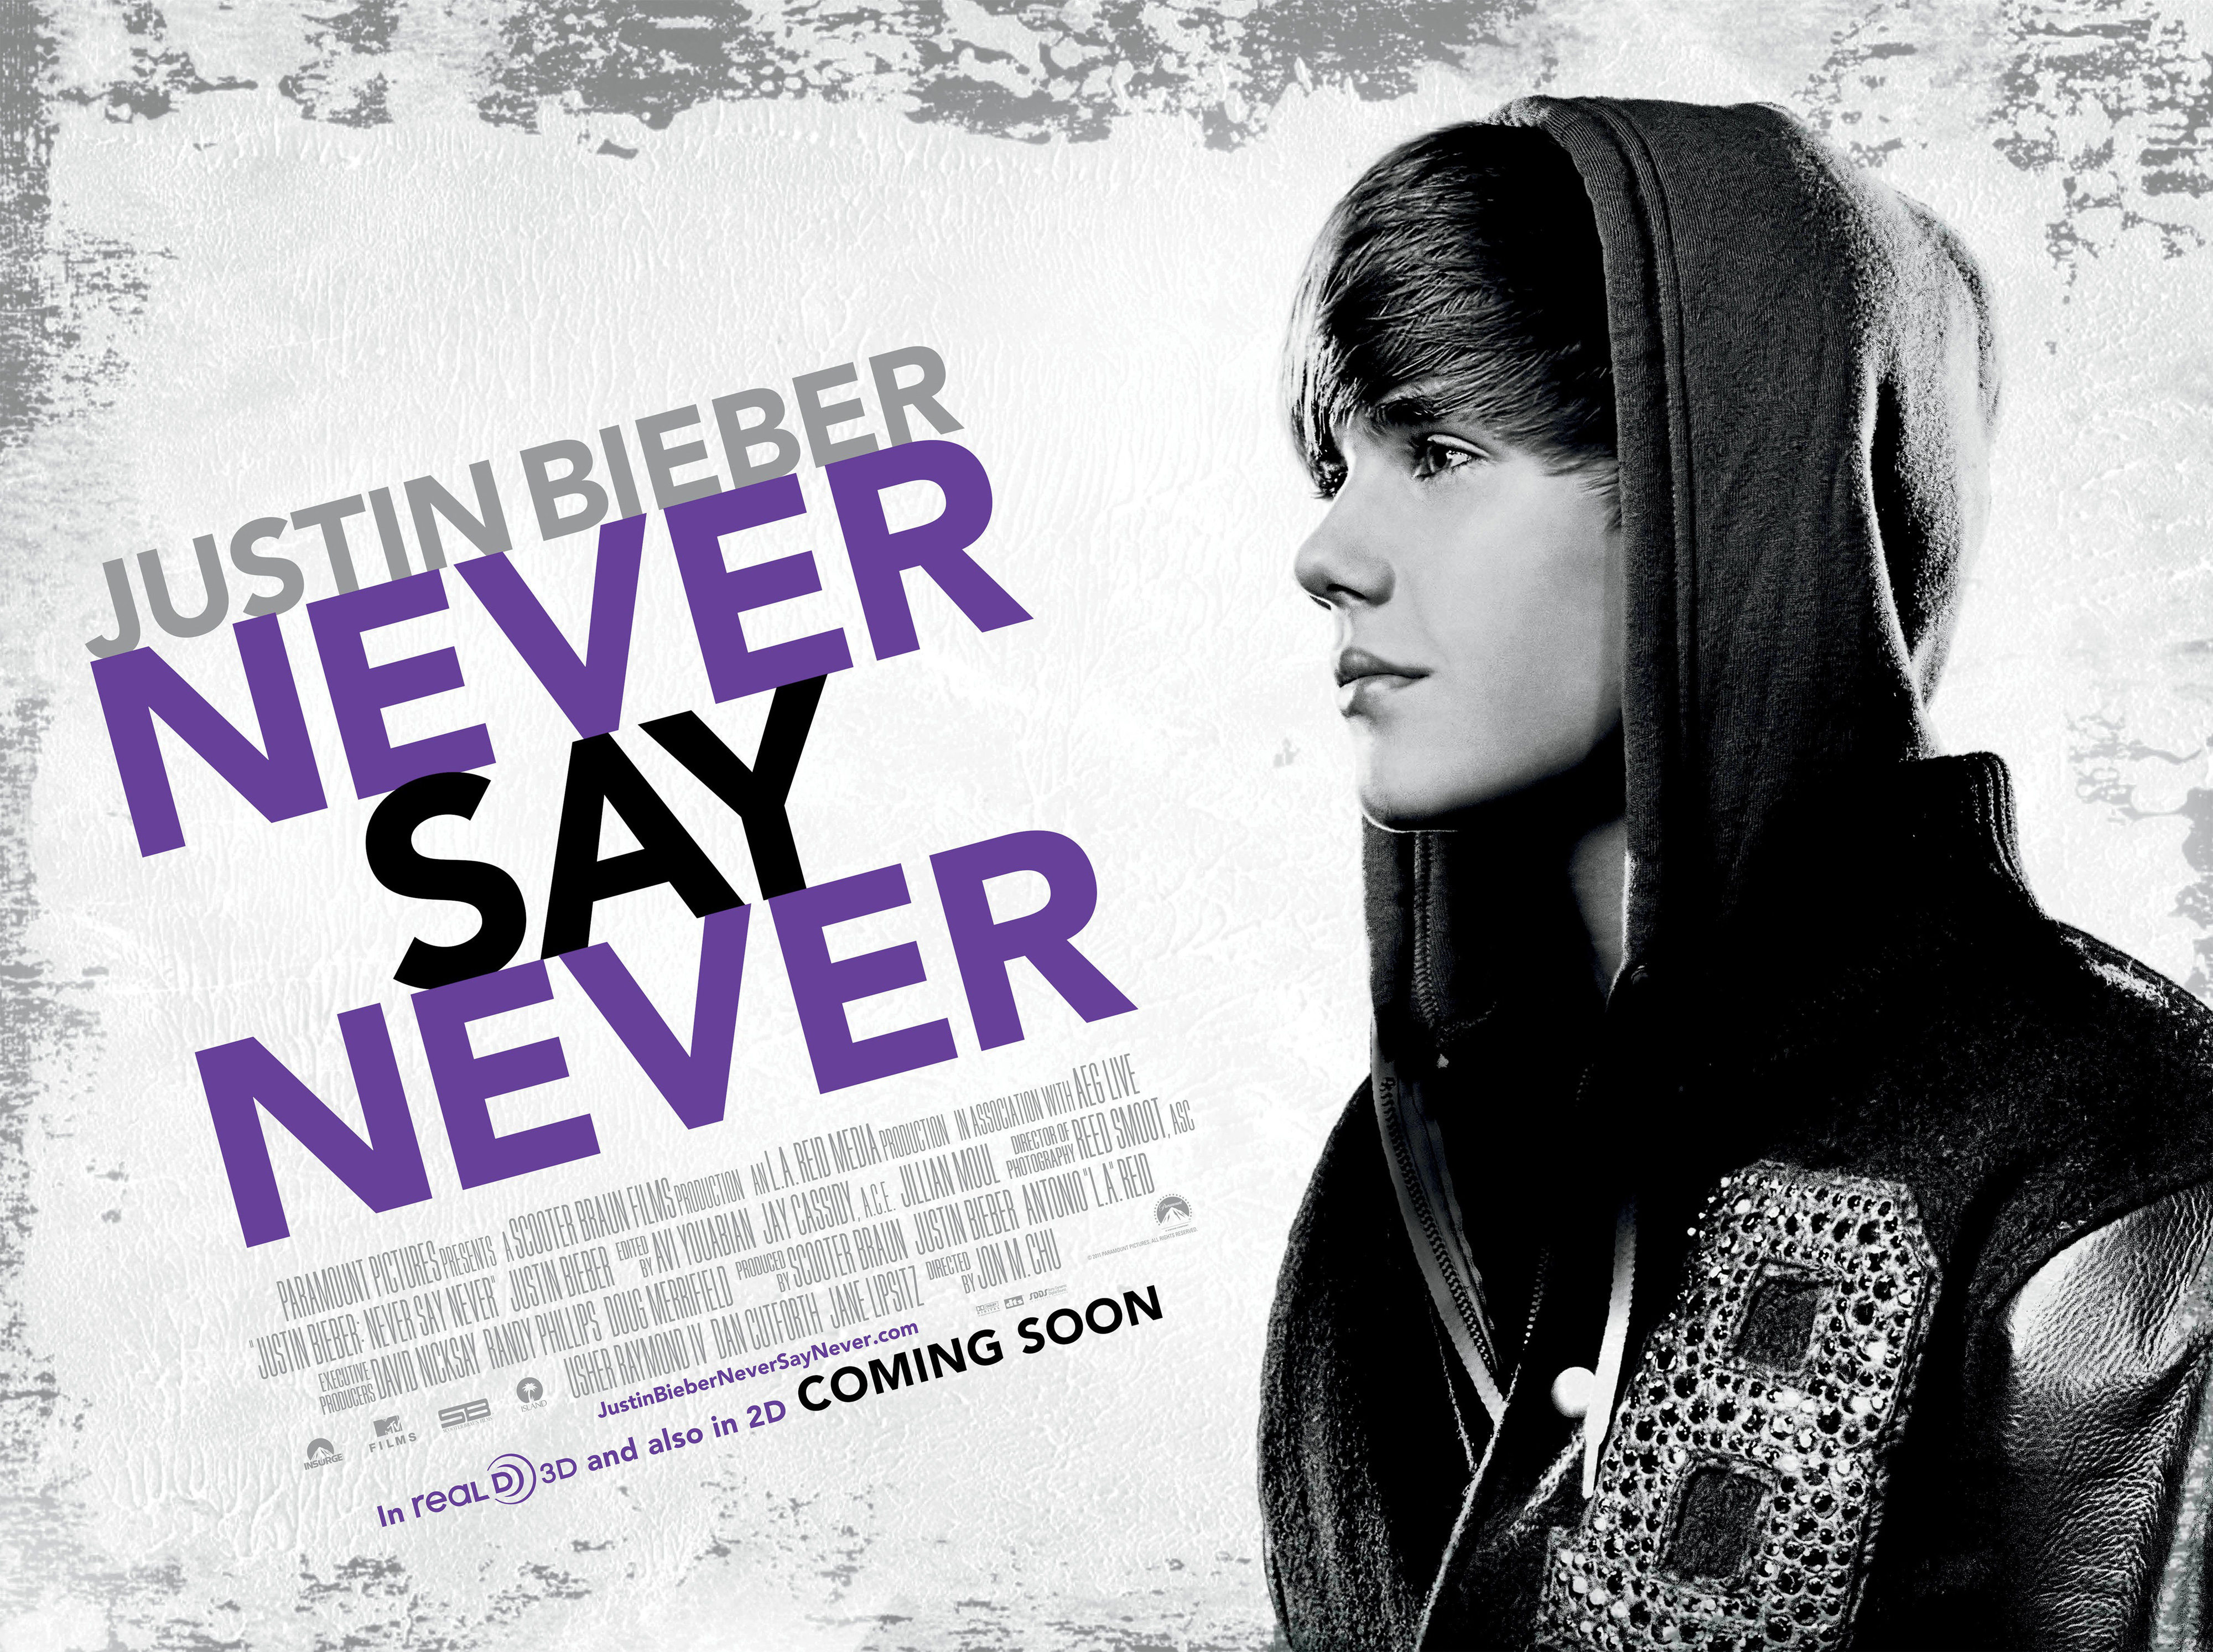 Have a never be the say. Джастин Бибер никогда не говори никогда. Джастин Бибер 2011 never say never.